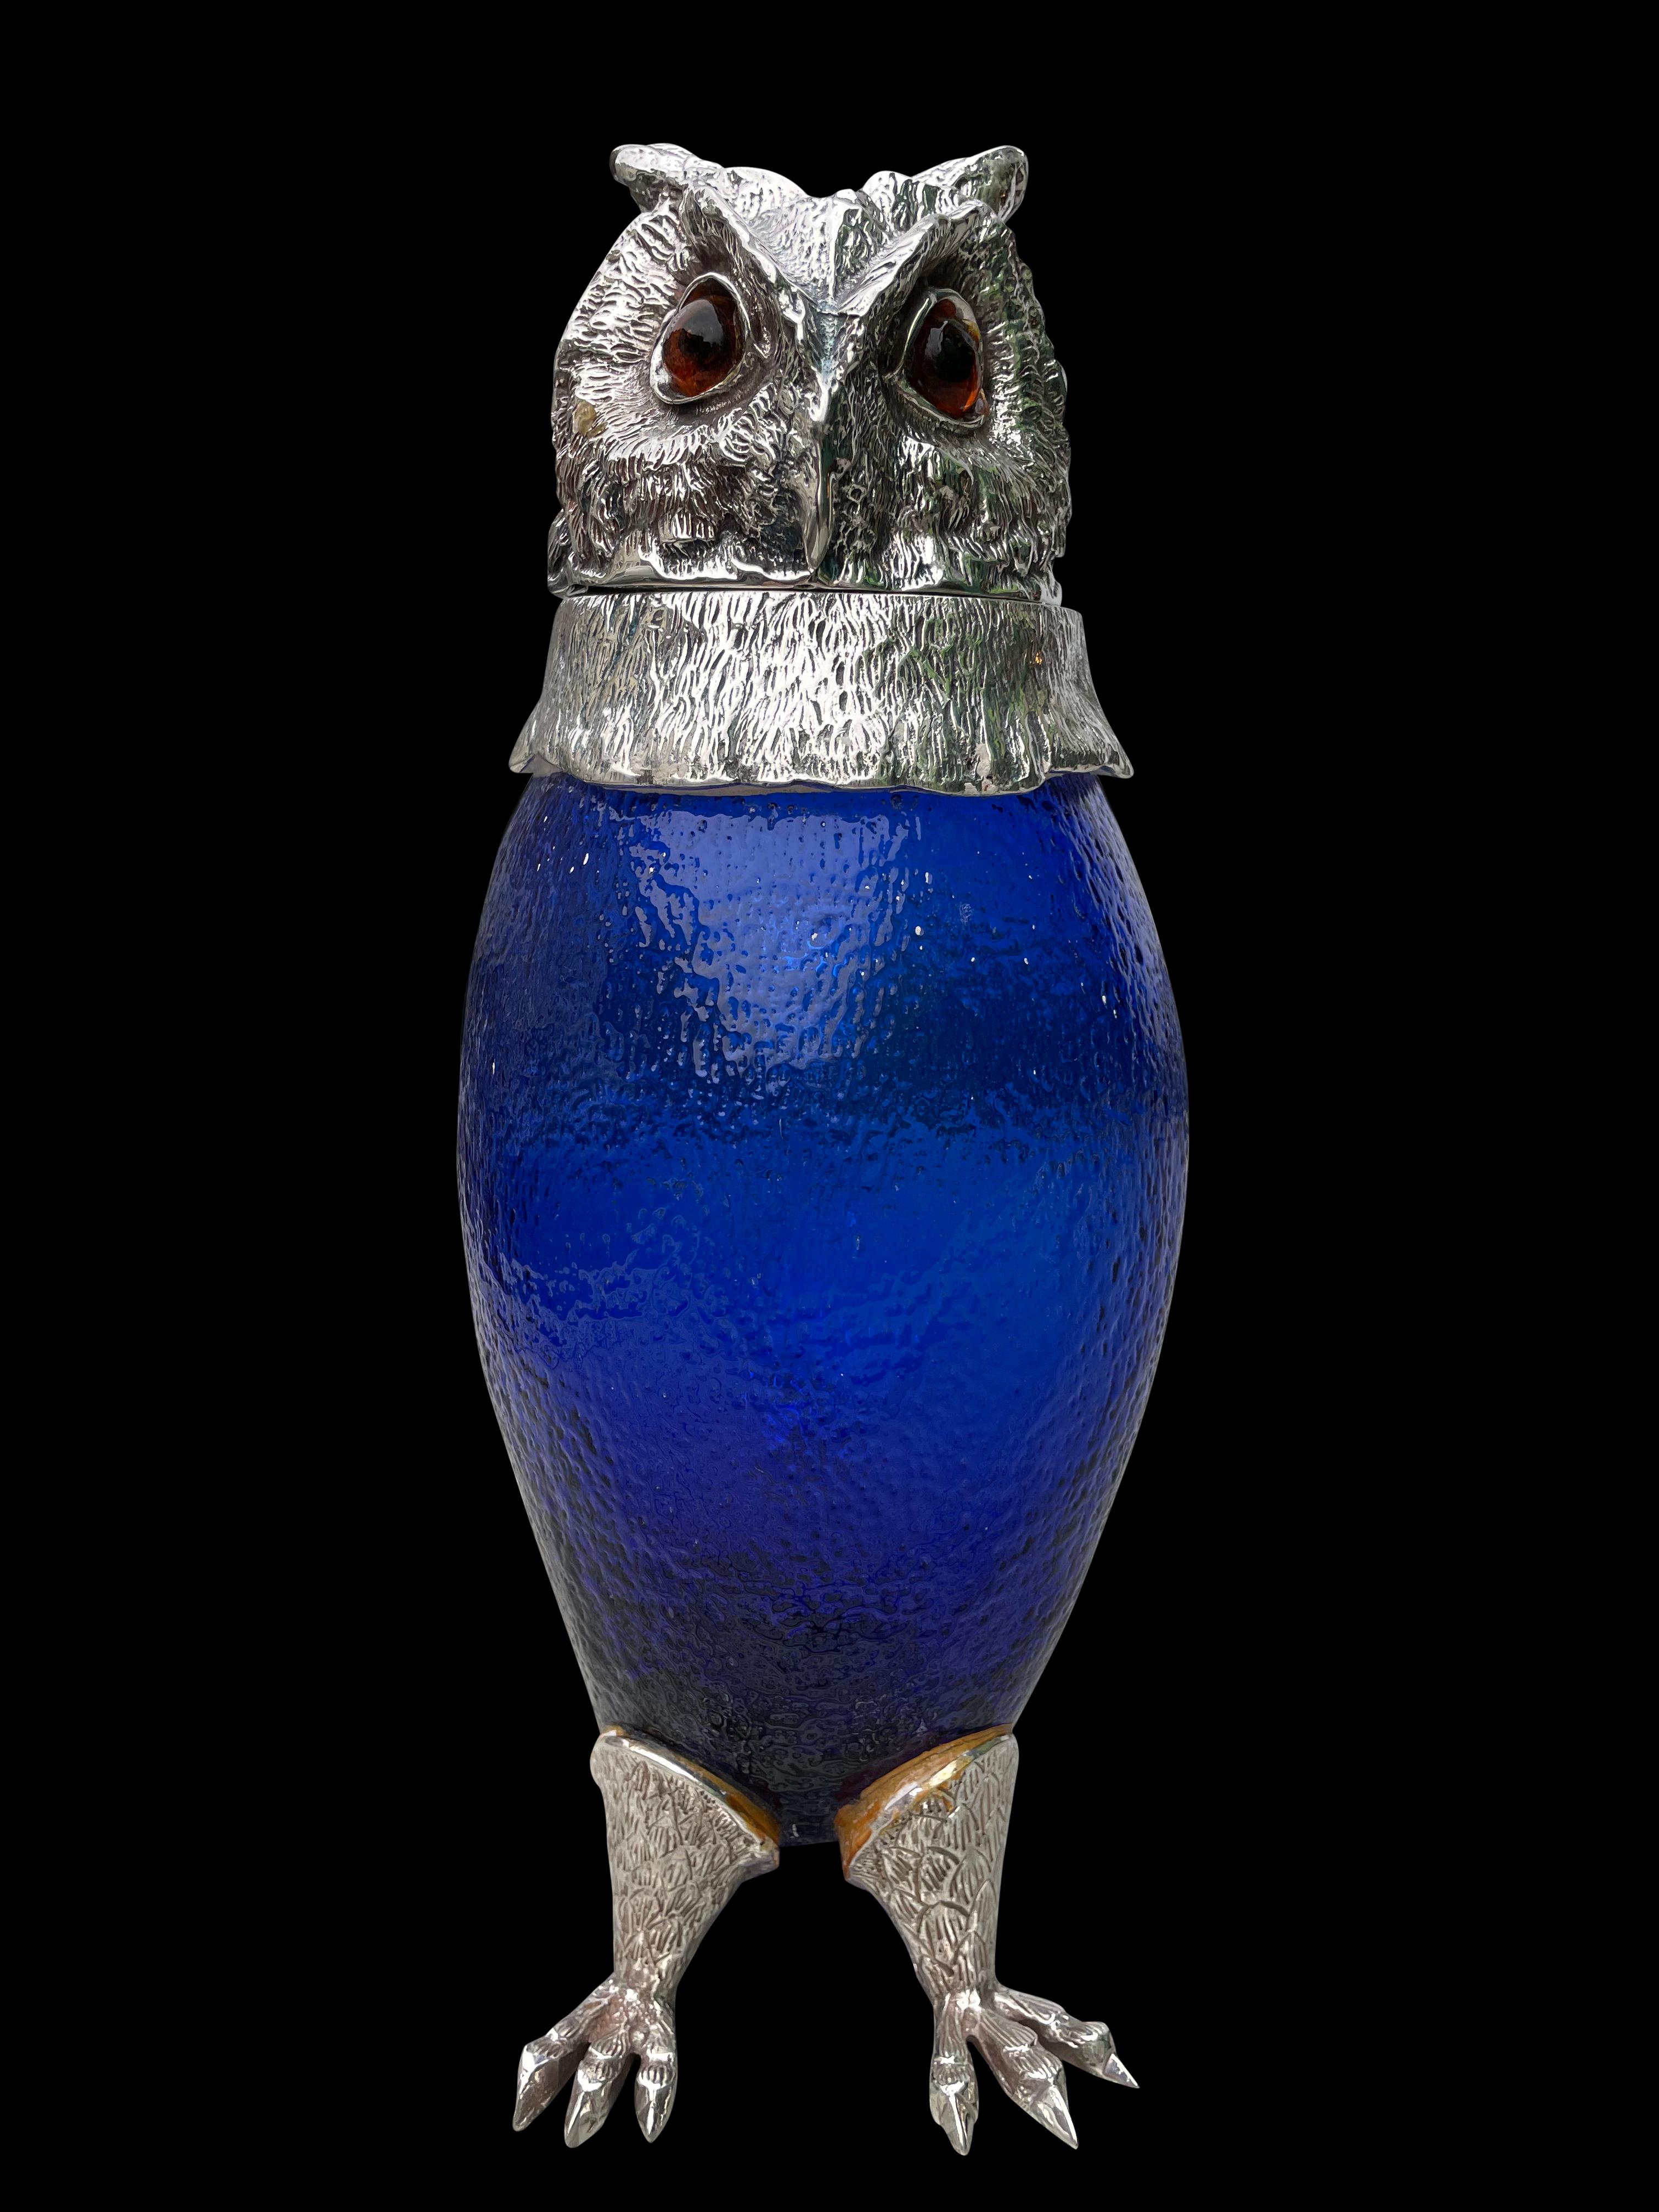 A fine silver plate owl decanter glass glass jug, 20th century. Superb for home use and decoration or interior design.